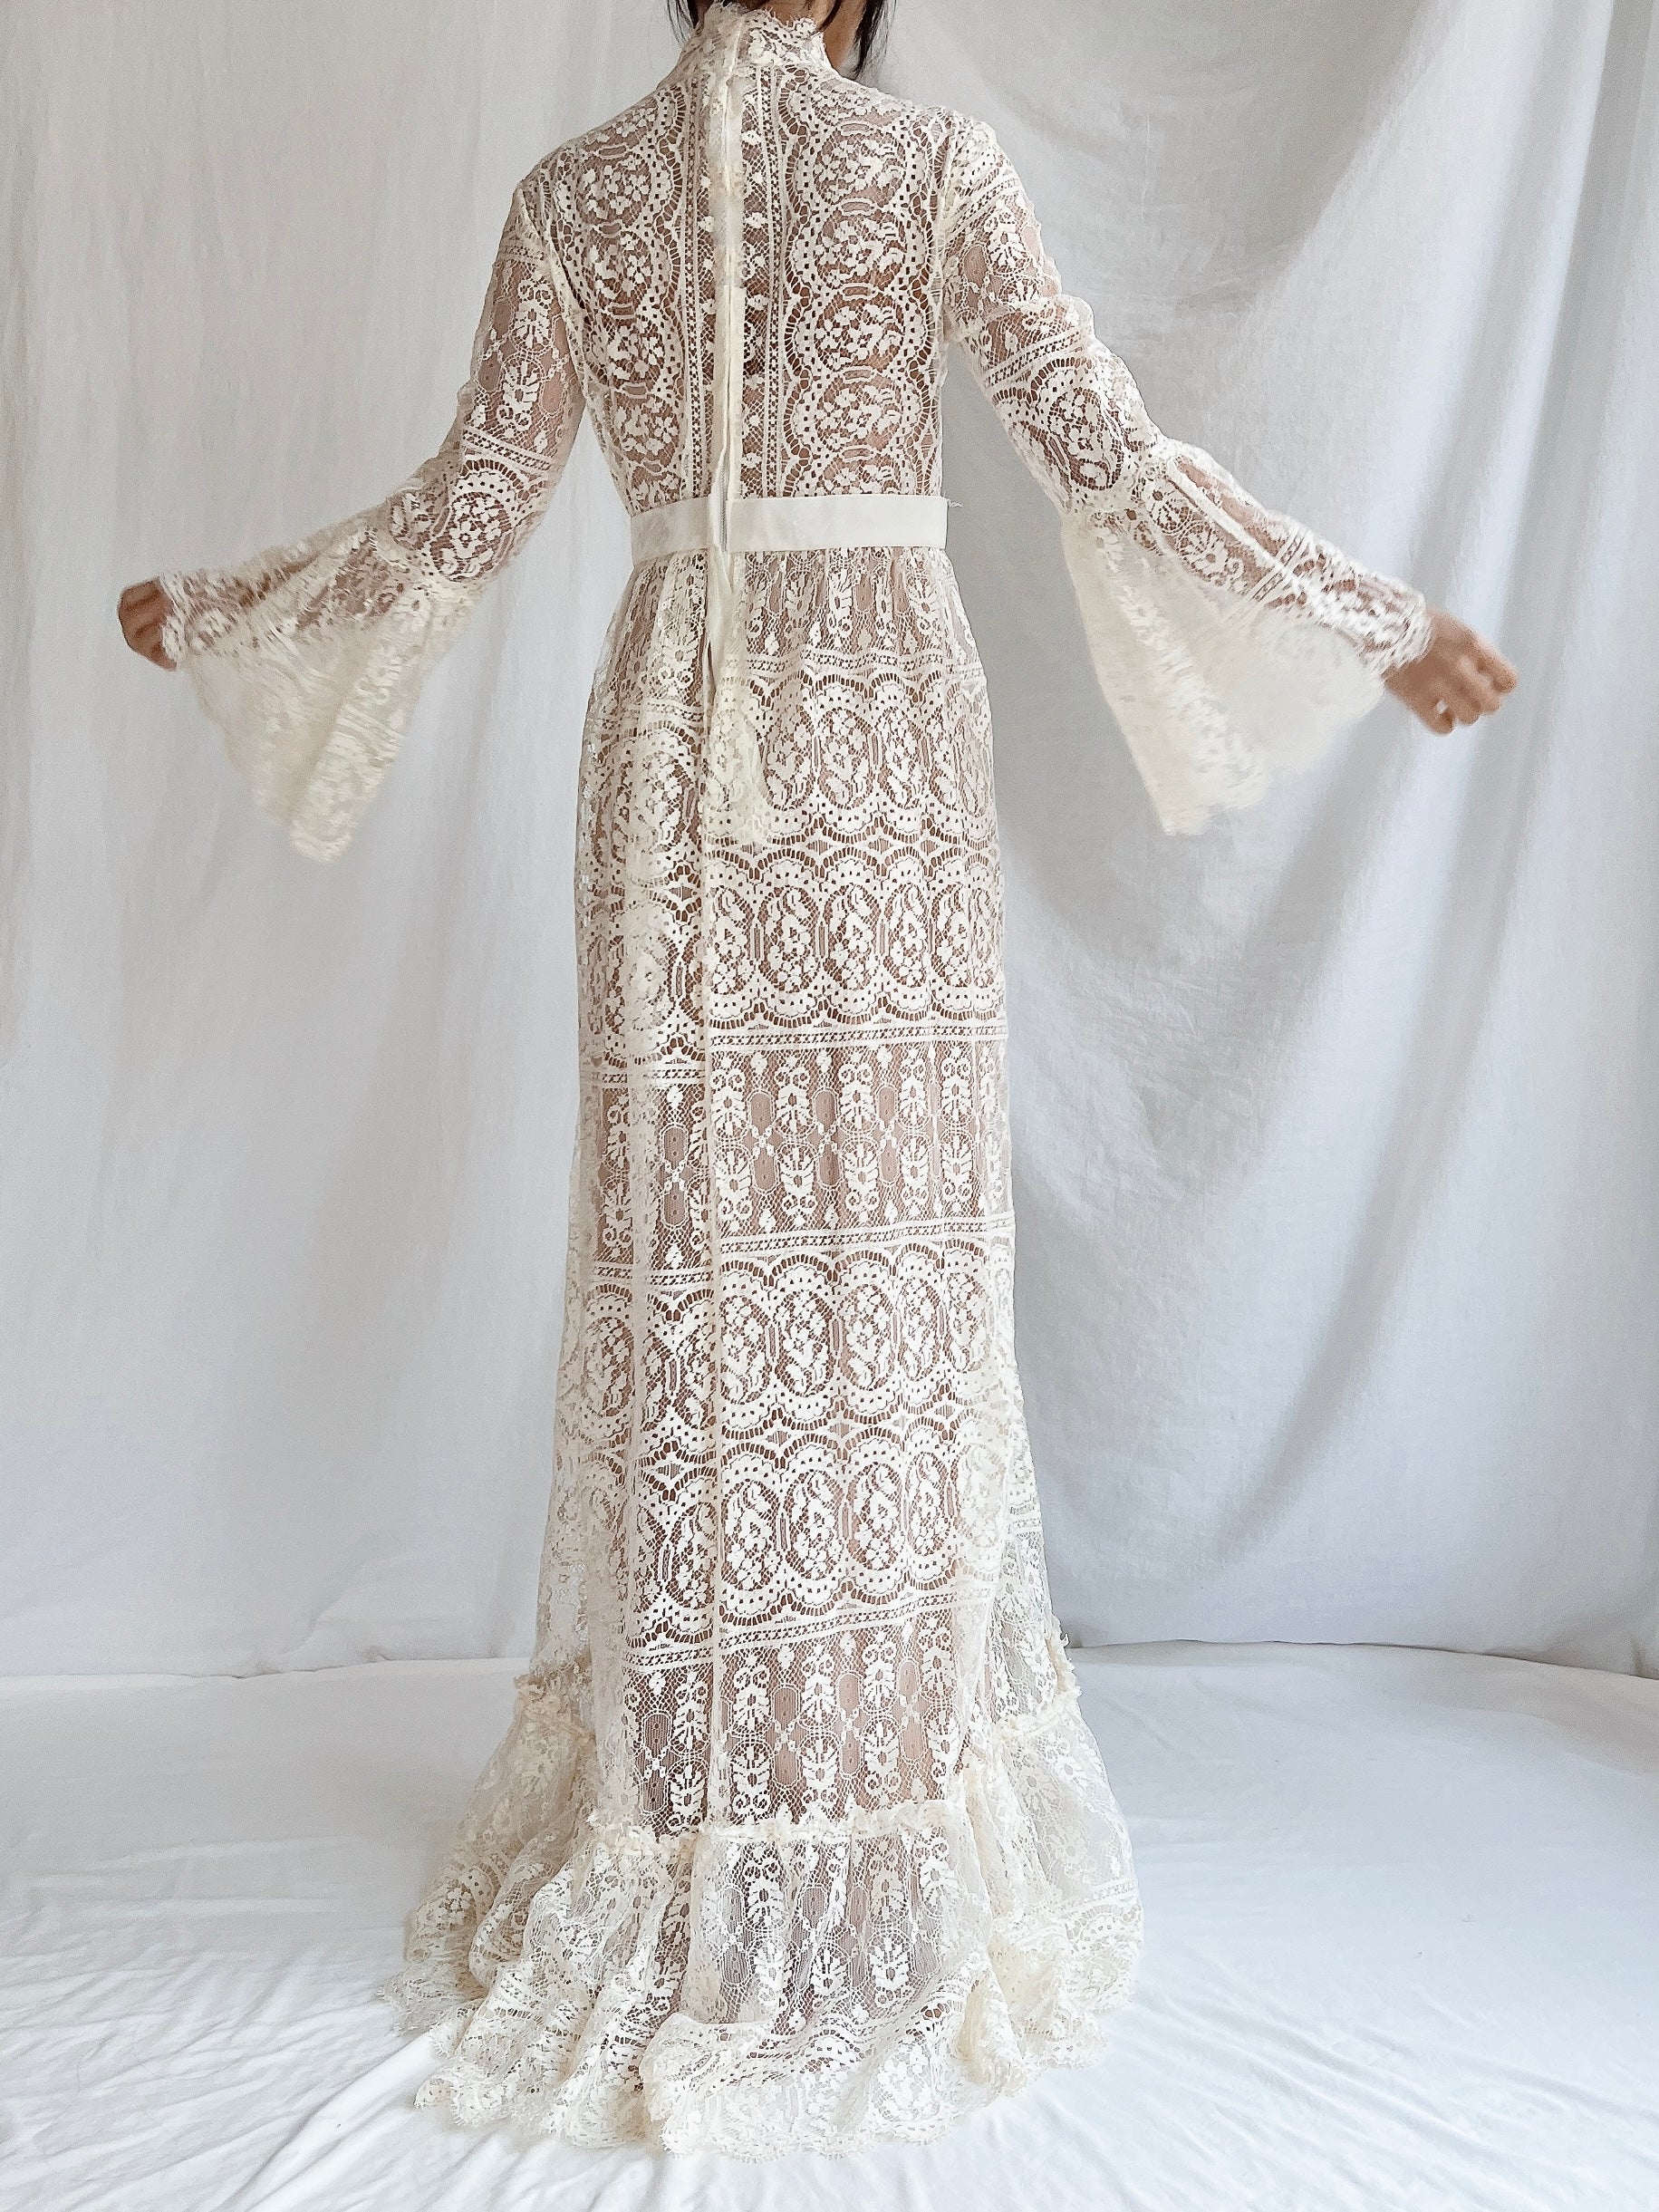 1970s Sheer Filet Lace Gown - M